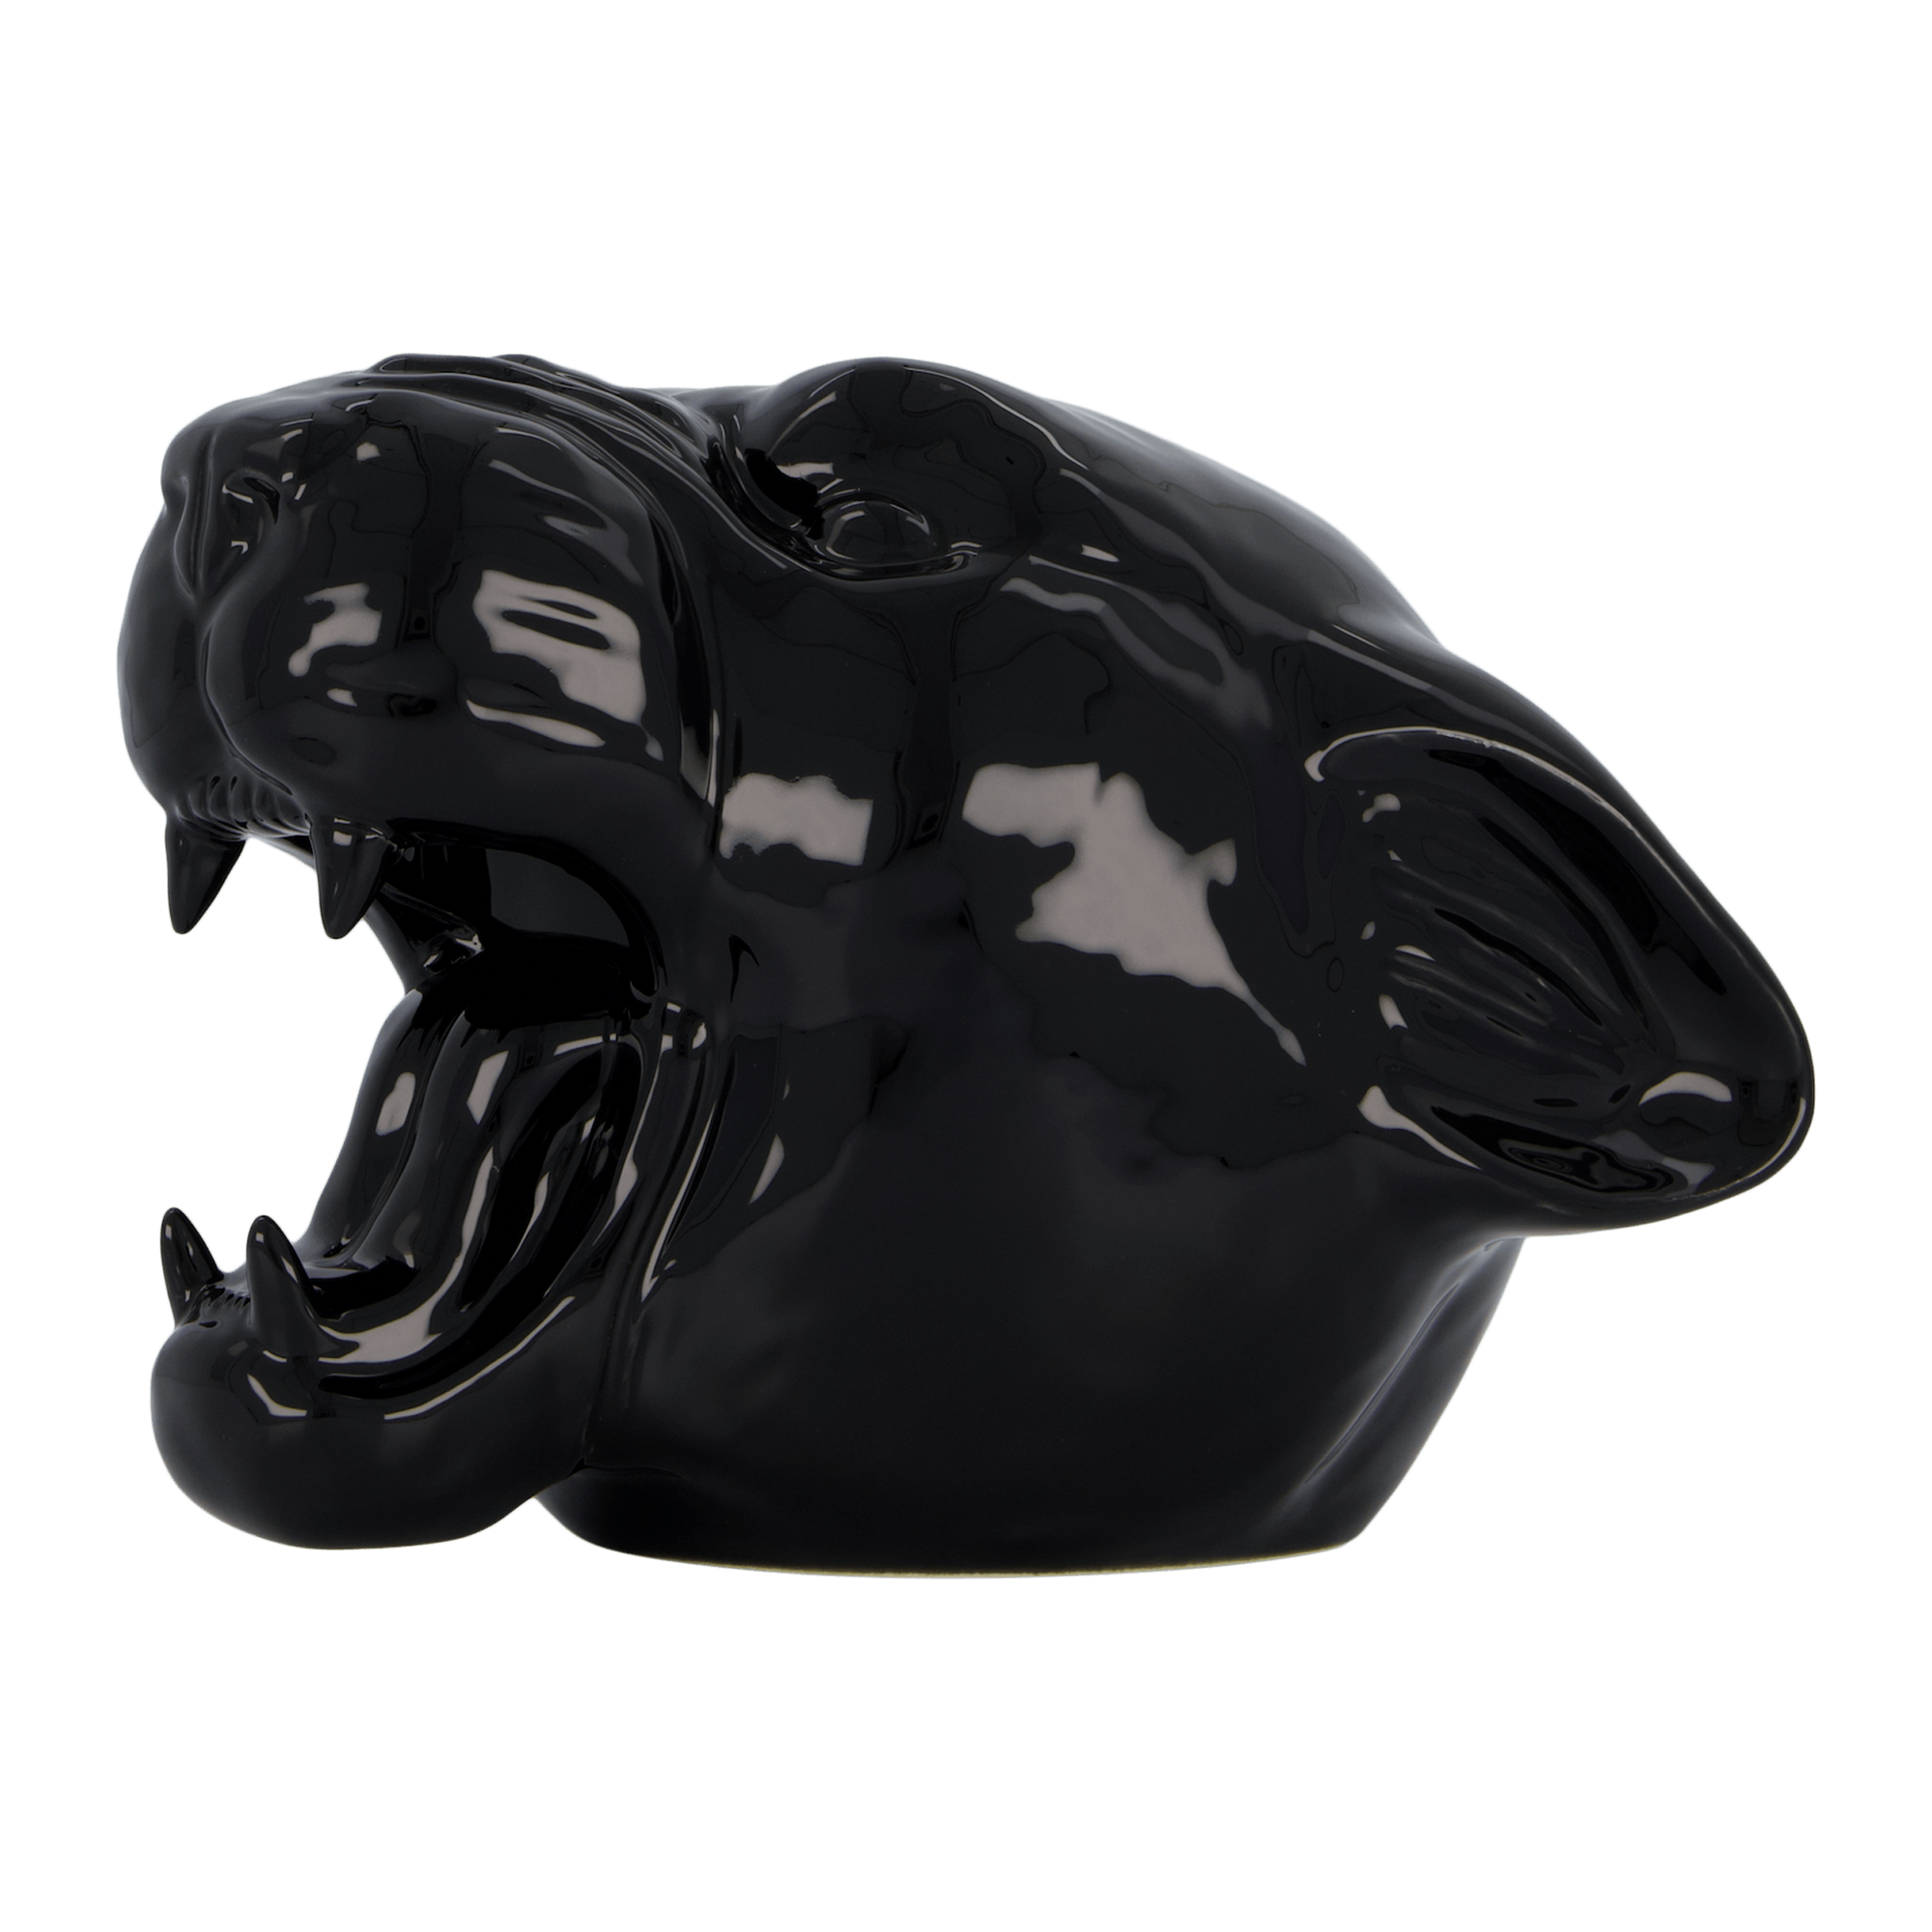 Panther Incense Chamber Black